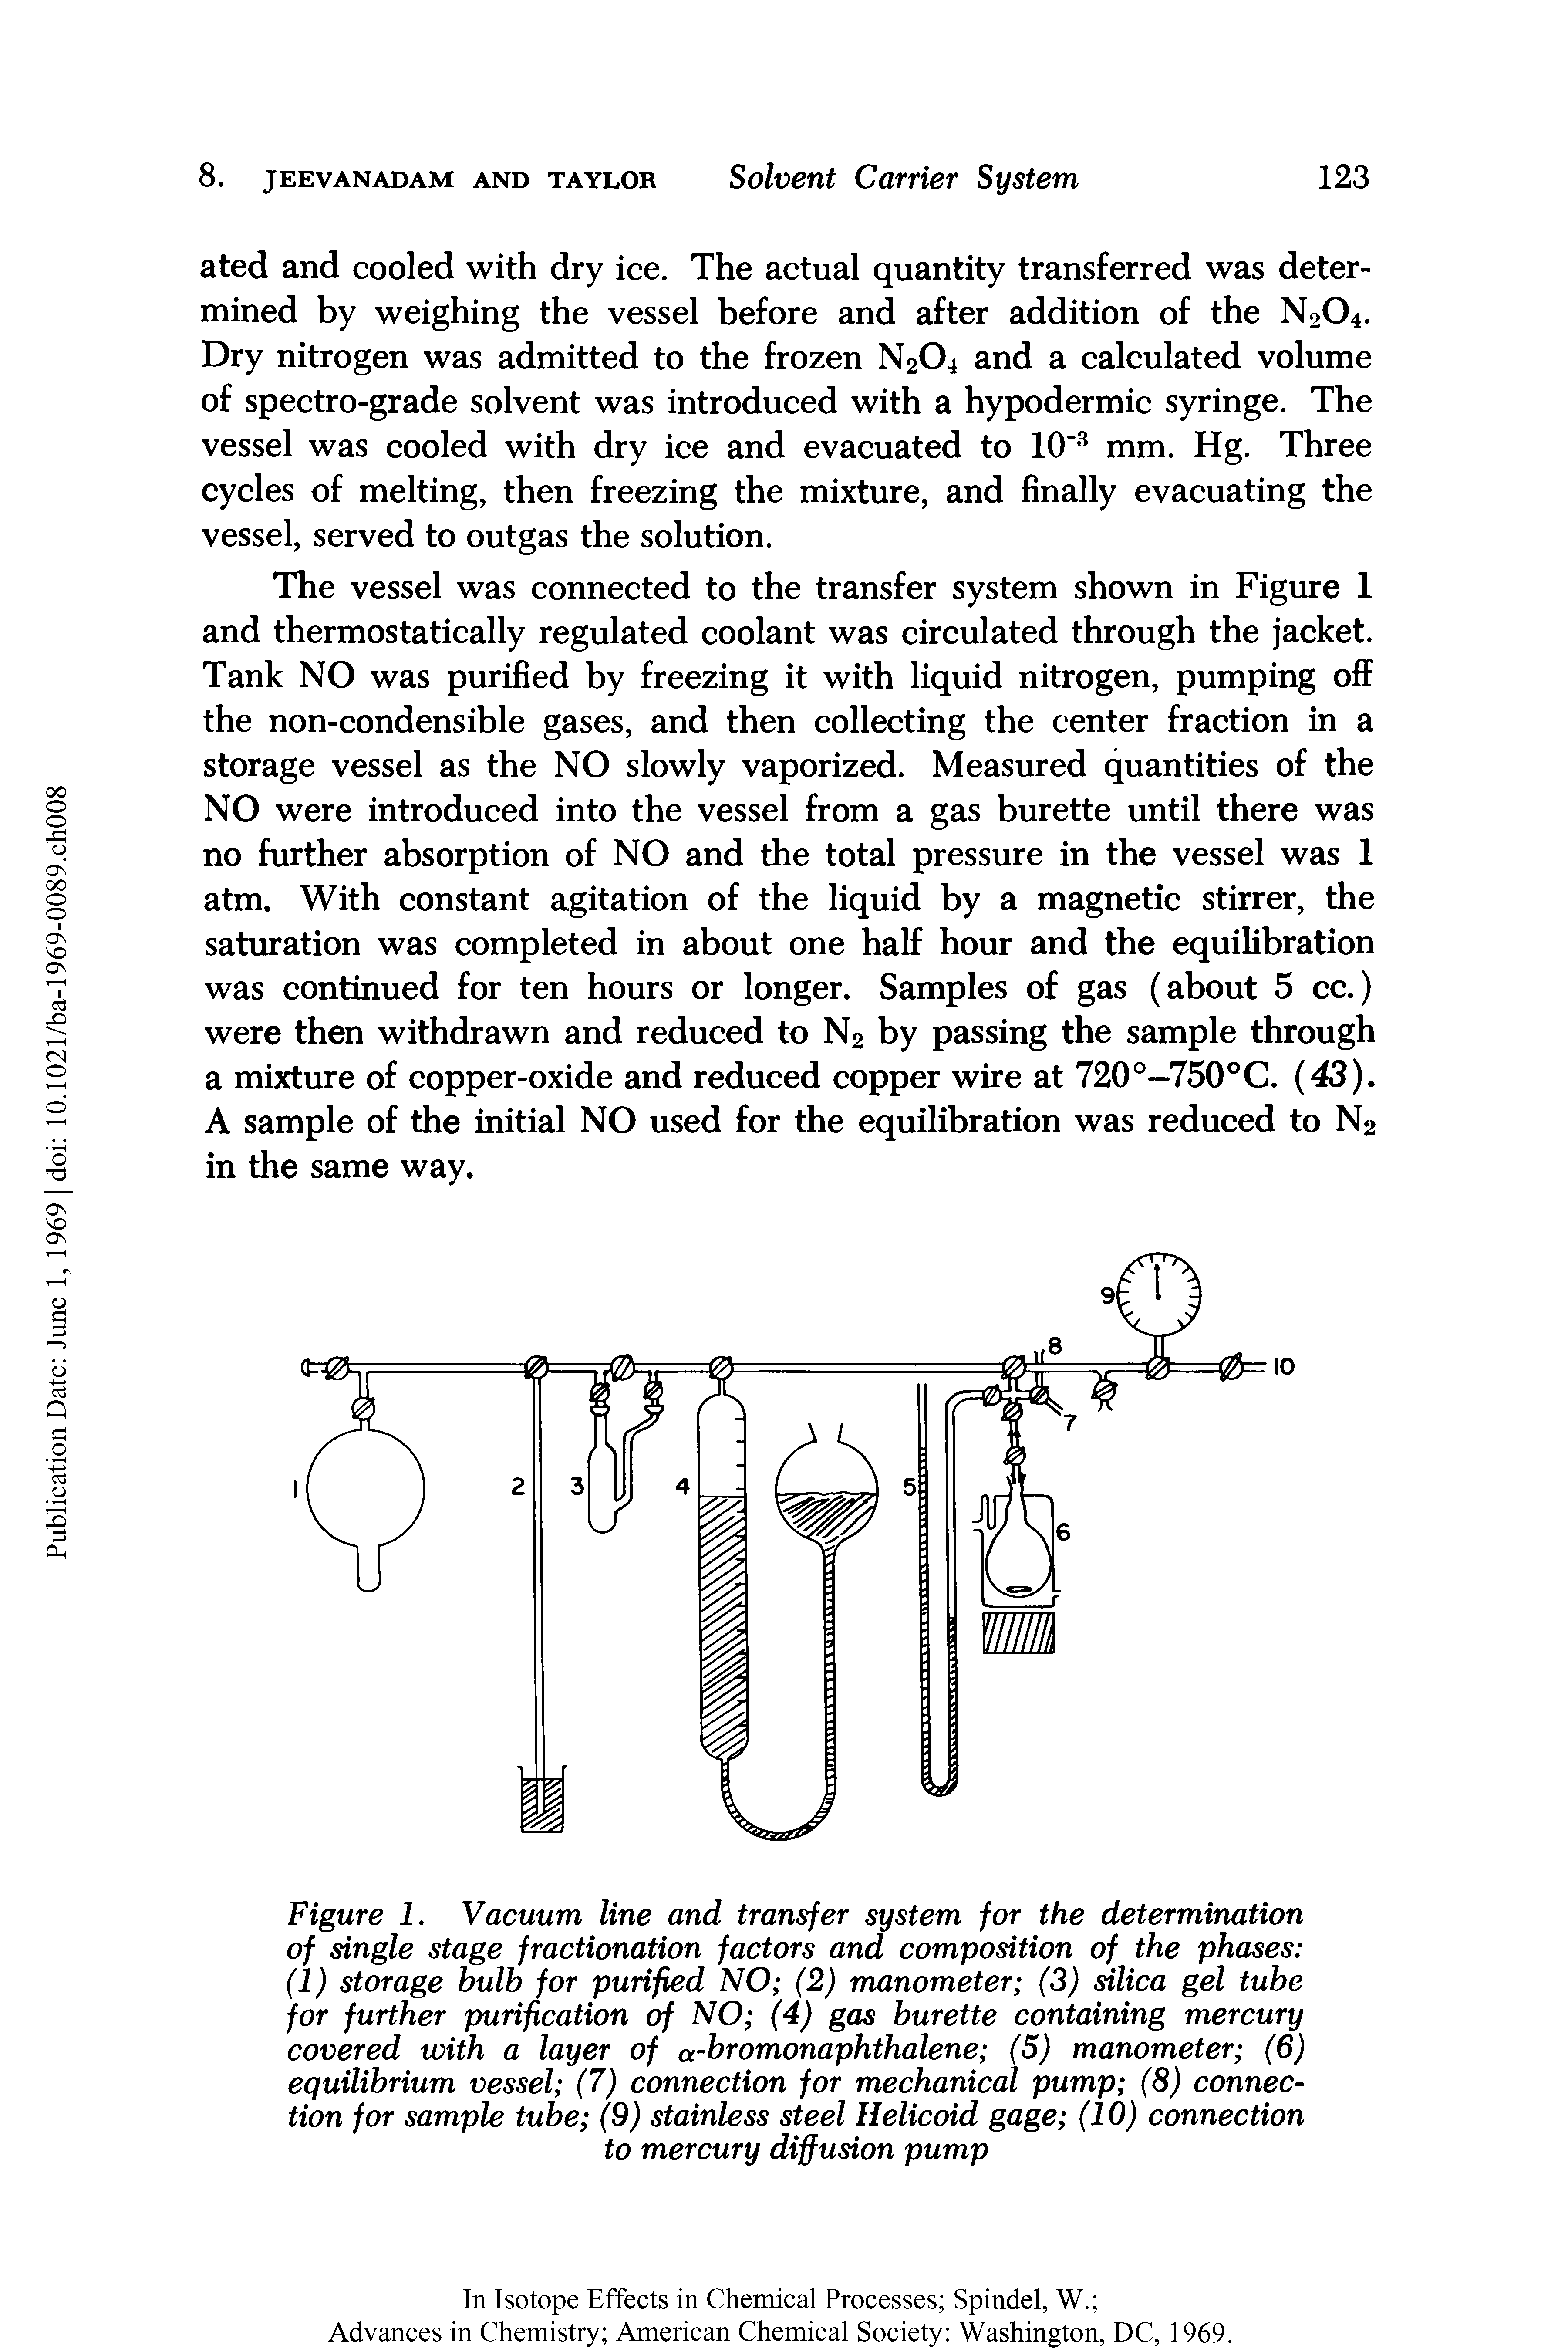 Figure 1. Vacuum line and transfer system for the determination of single stage fractionation factors and composition of the phases (1) storage hulb for purified NO (2) manometer (3) silica gel tube for further purification of NO (4) gas burette containing mercury covered with a layer of a-bromonaphthalene (5) manometer (6) equilibrium vessel (7) connection for mechanical pump (8) connection for sample tube (9) stainless steel Helicoid gage (10) connection to mercury diffusion pump...